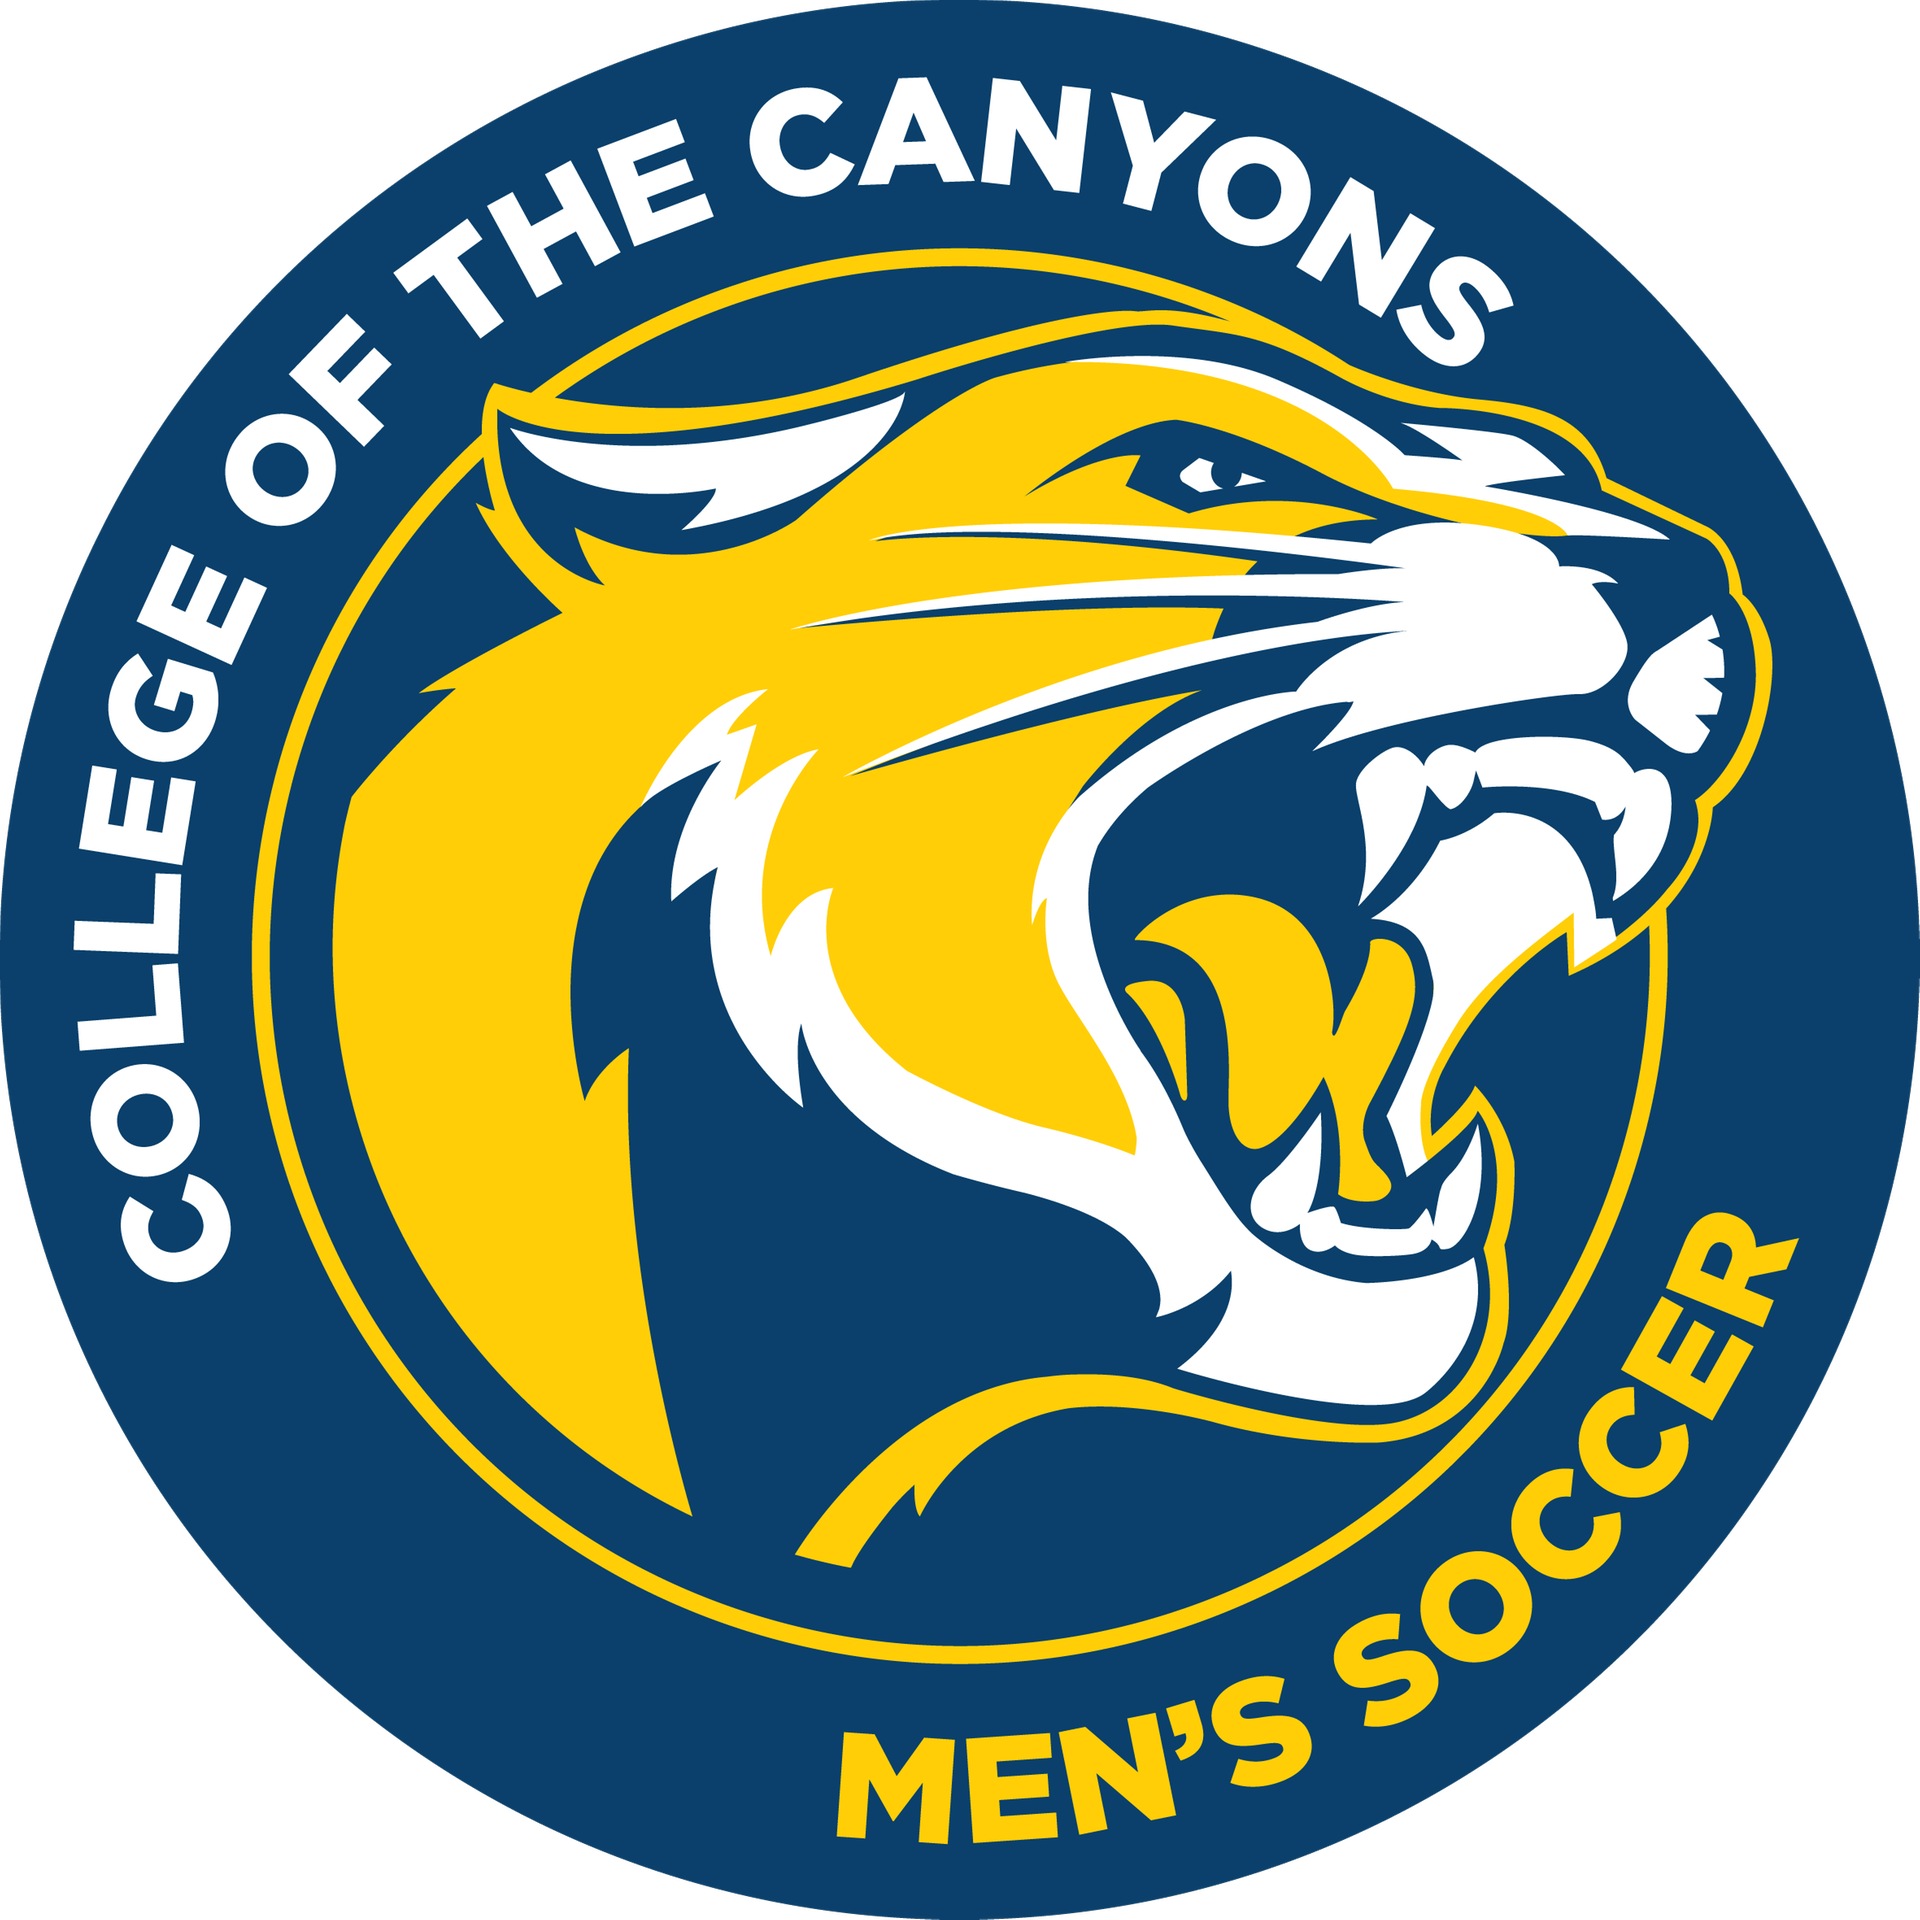 College of the Canyons men's soccer athletic logo.